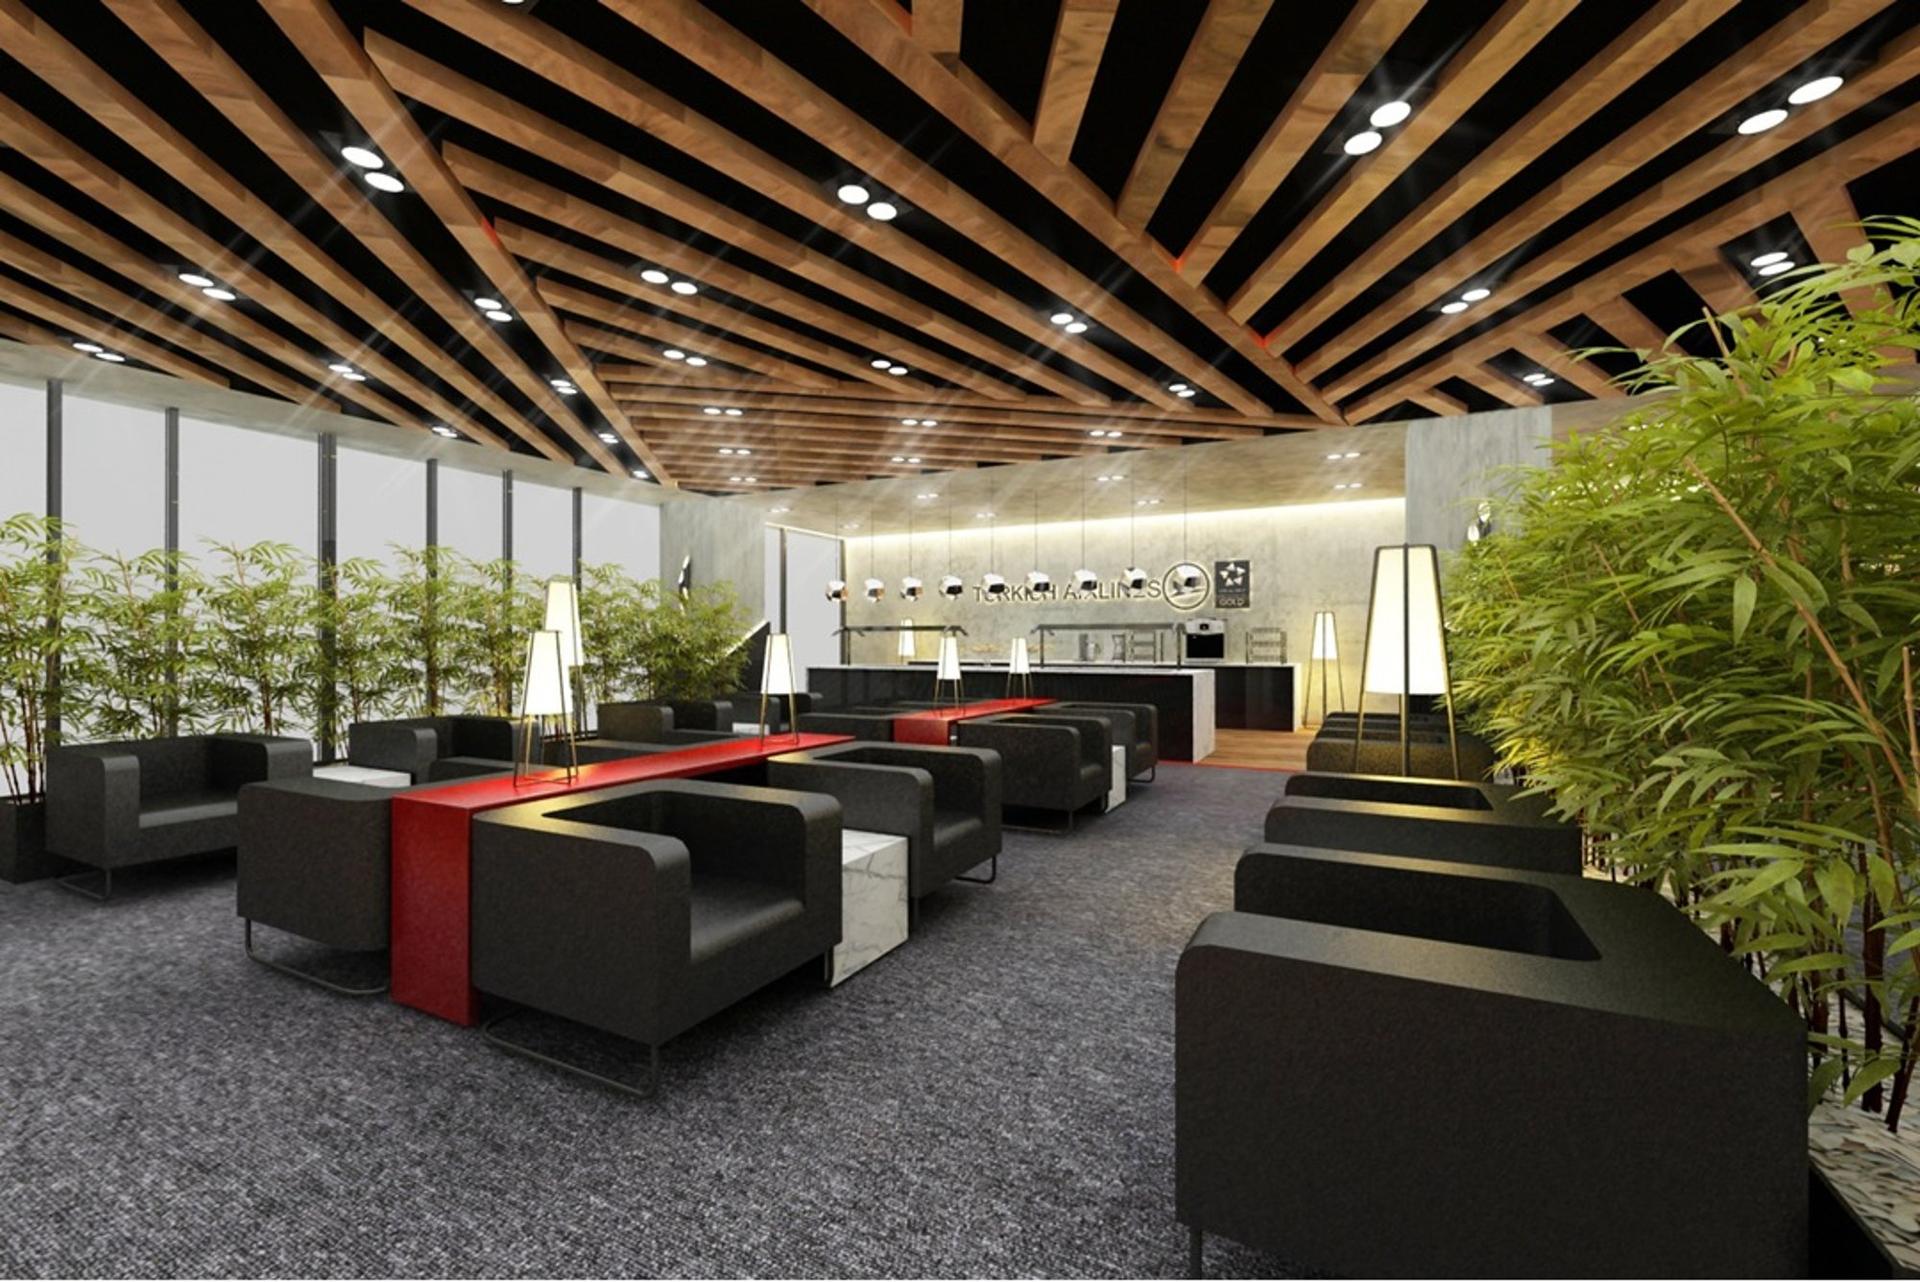 Turkish Airlines CIP Lounge (Business Lounge) image 12 of 27